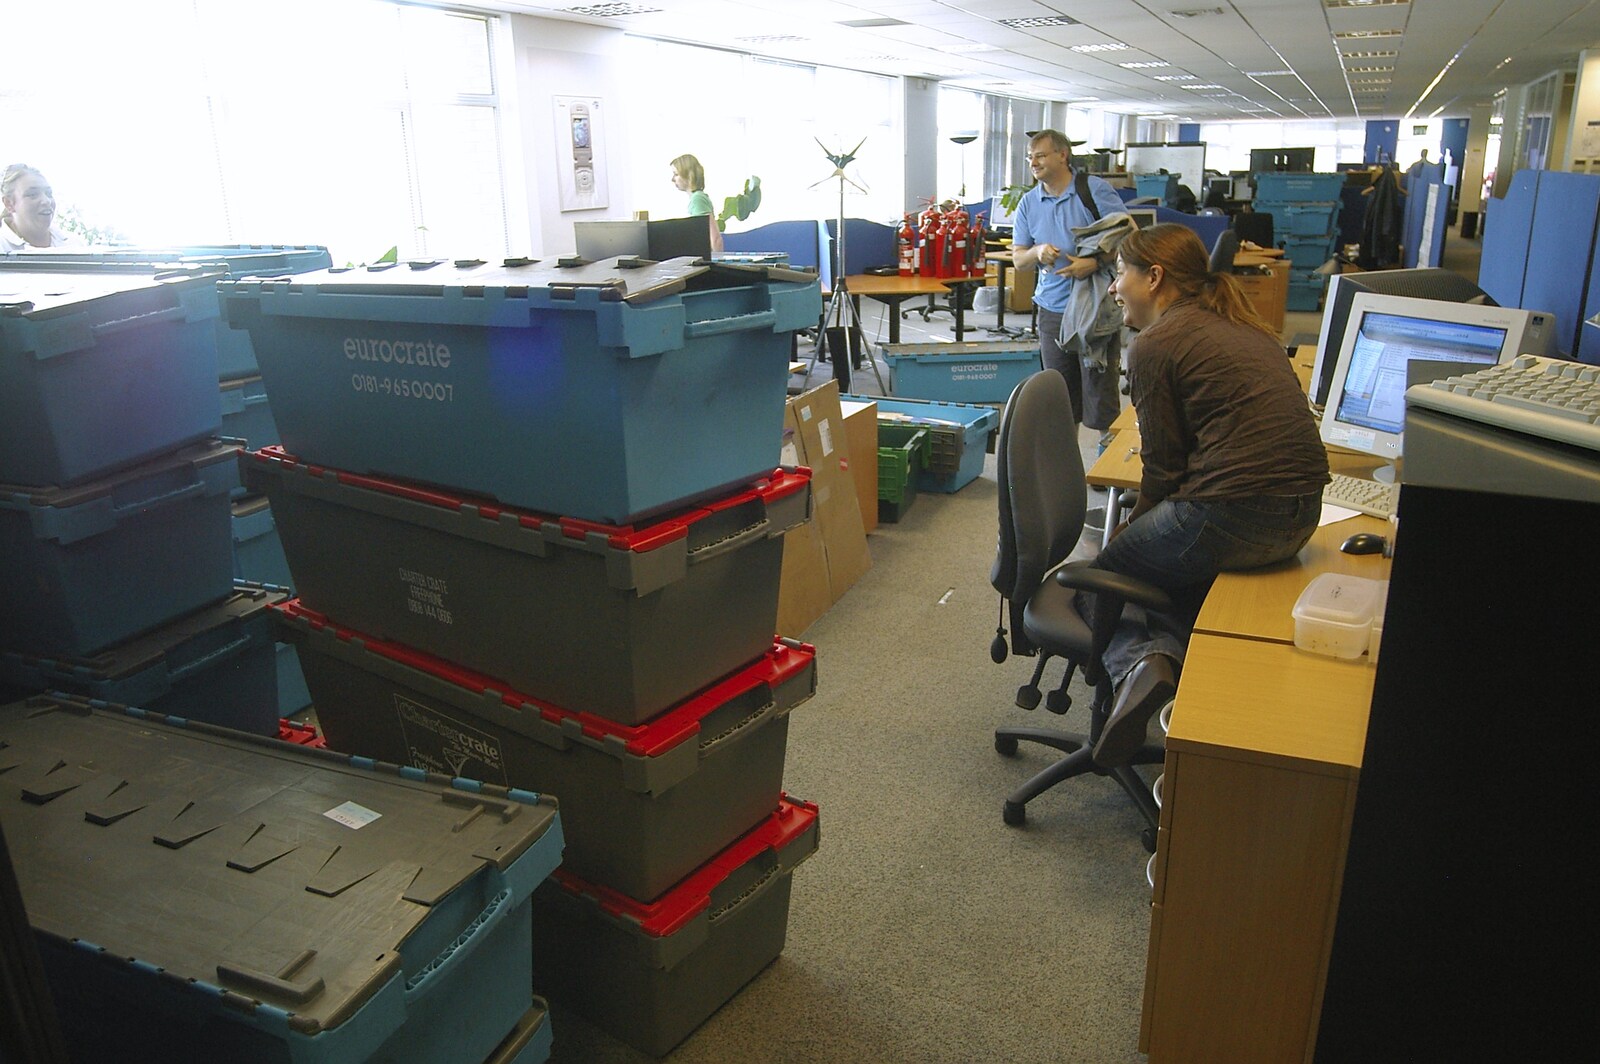 More 'crate city' from Qualcomm Moves Offices, Milton Road, Cambridge - 26th July 2006